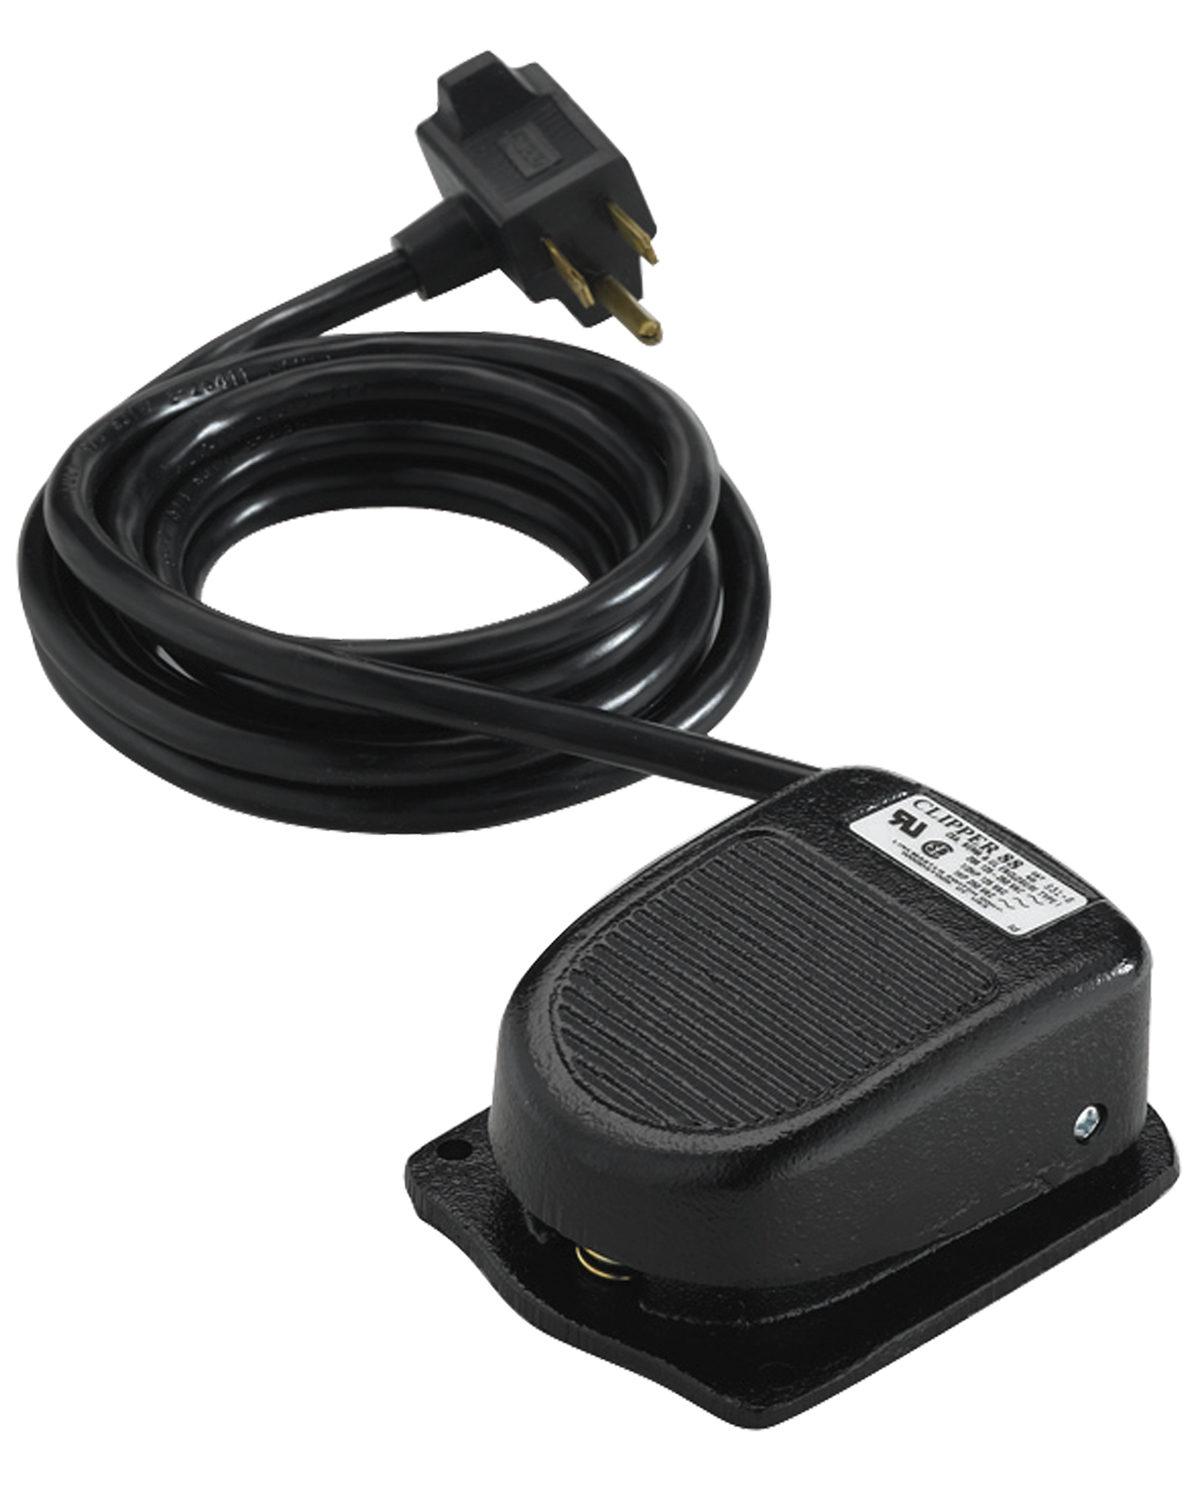 foot pedal unassigned in inqscribe